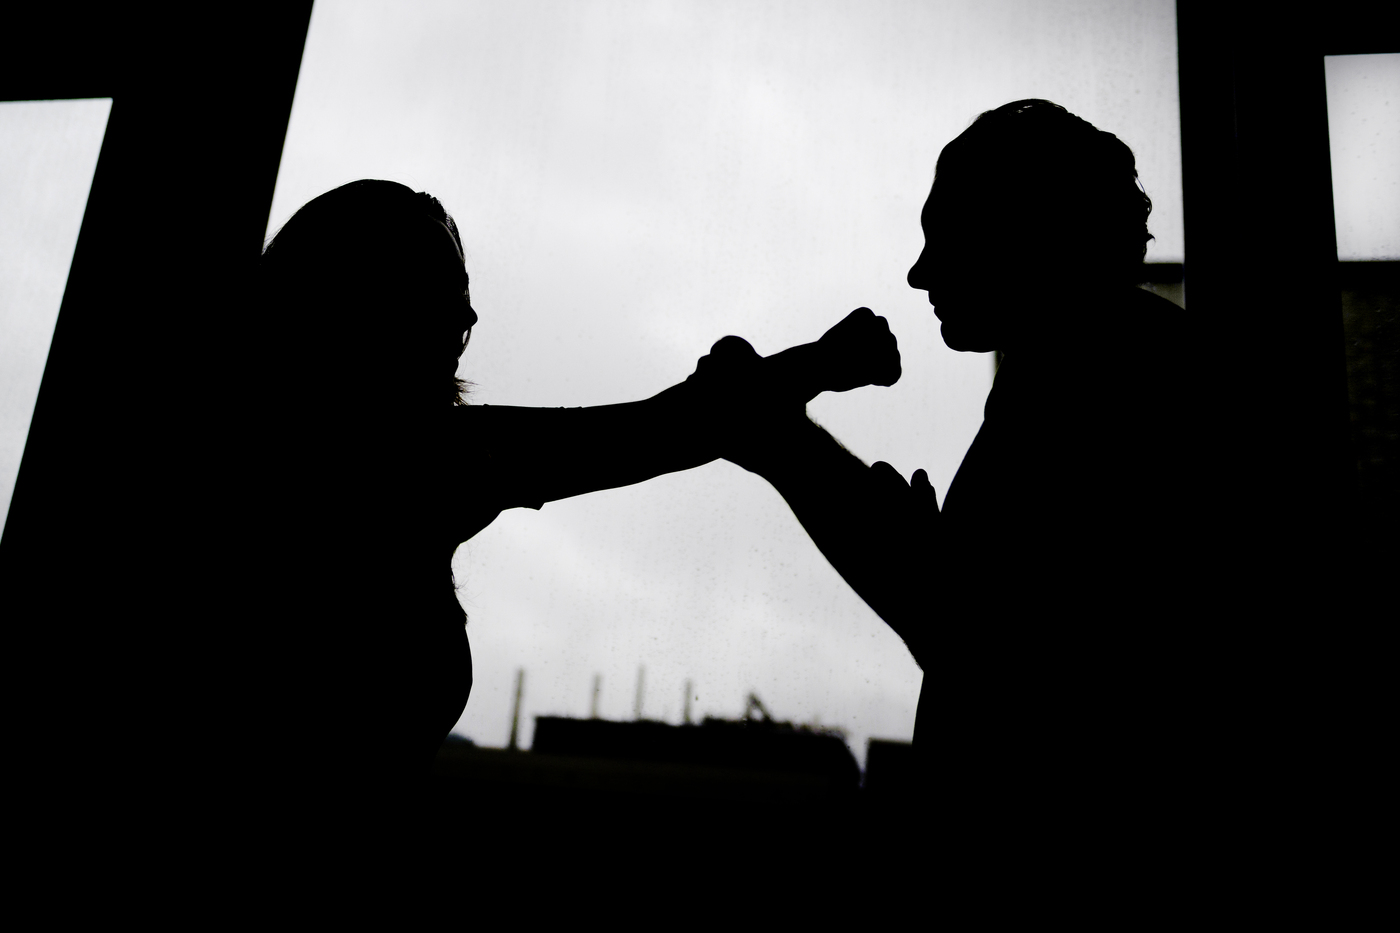 A silhouette of two people pretending to fight.